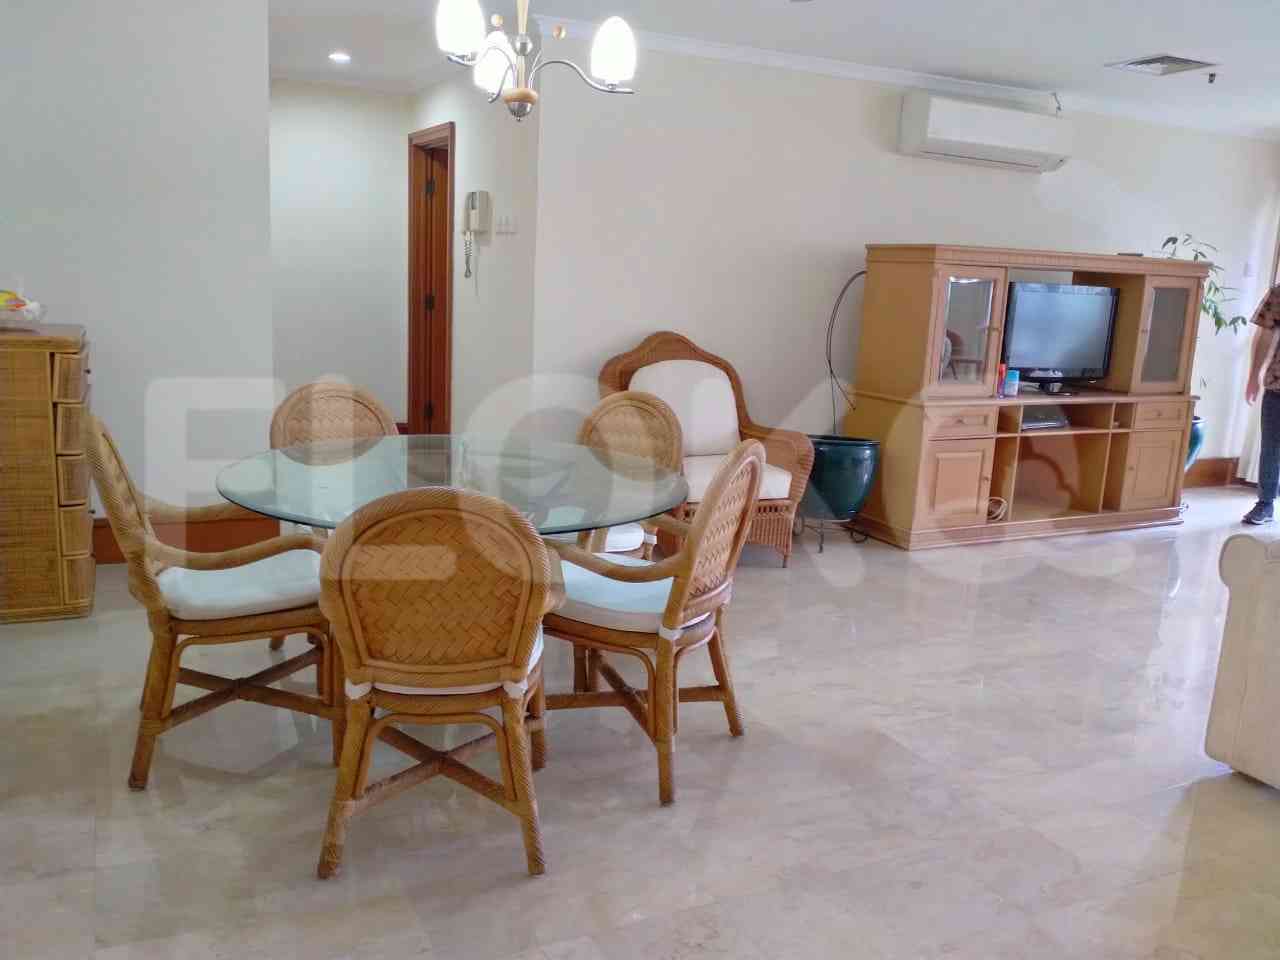 3 Bedroom on 5th Floor for Rent in Kemang Jaya Apartment - fkee55 1